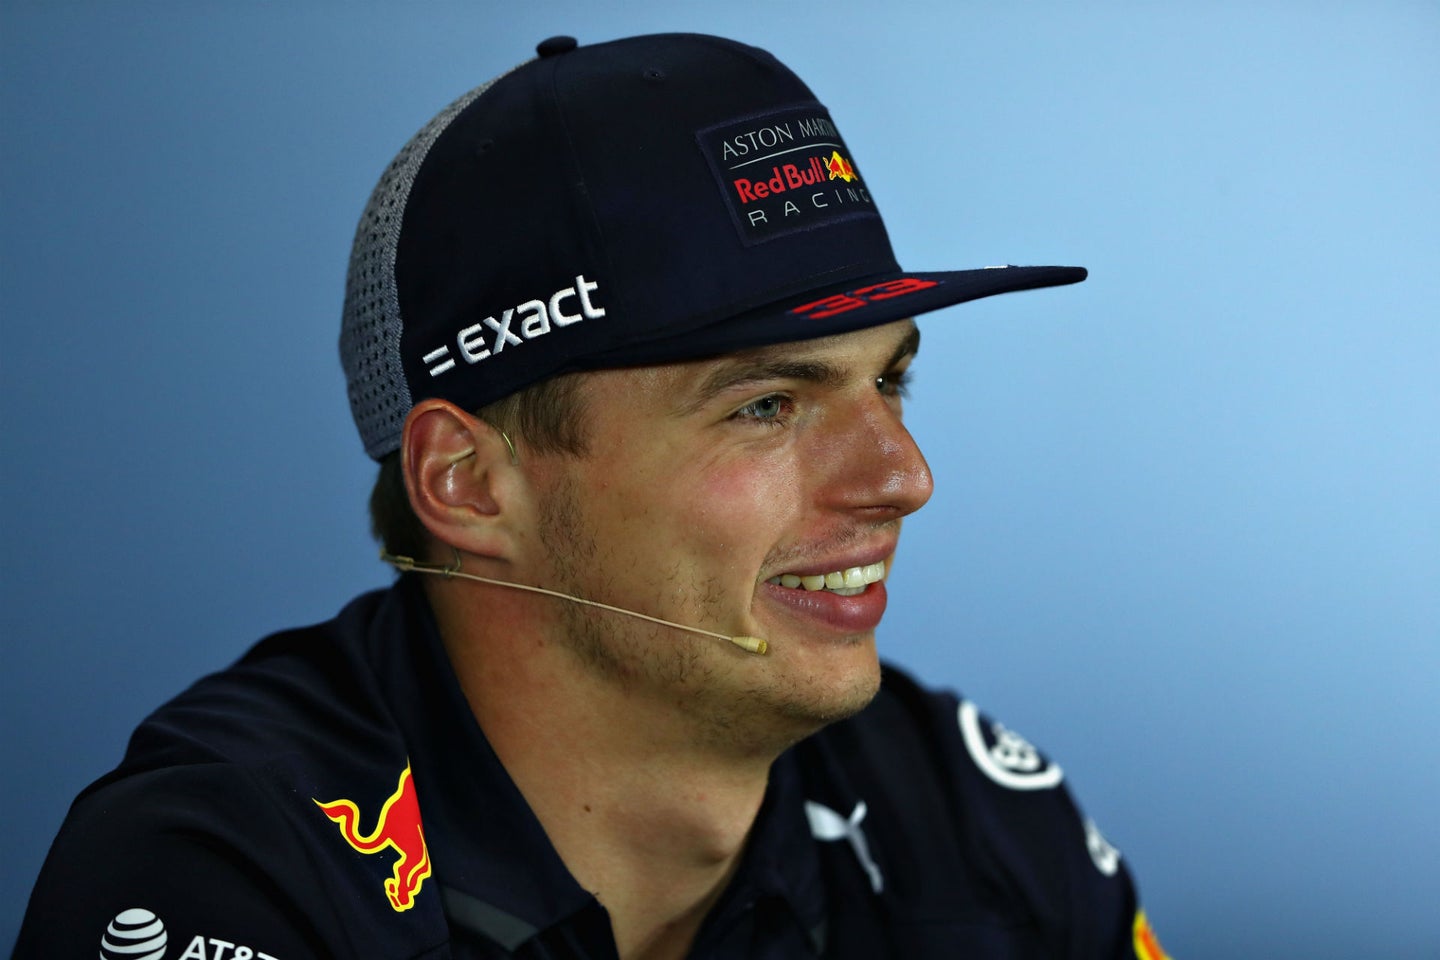 Max Verstappen Might Move to IndyCar or Le Mans When He’s ‘Old and Slow’